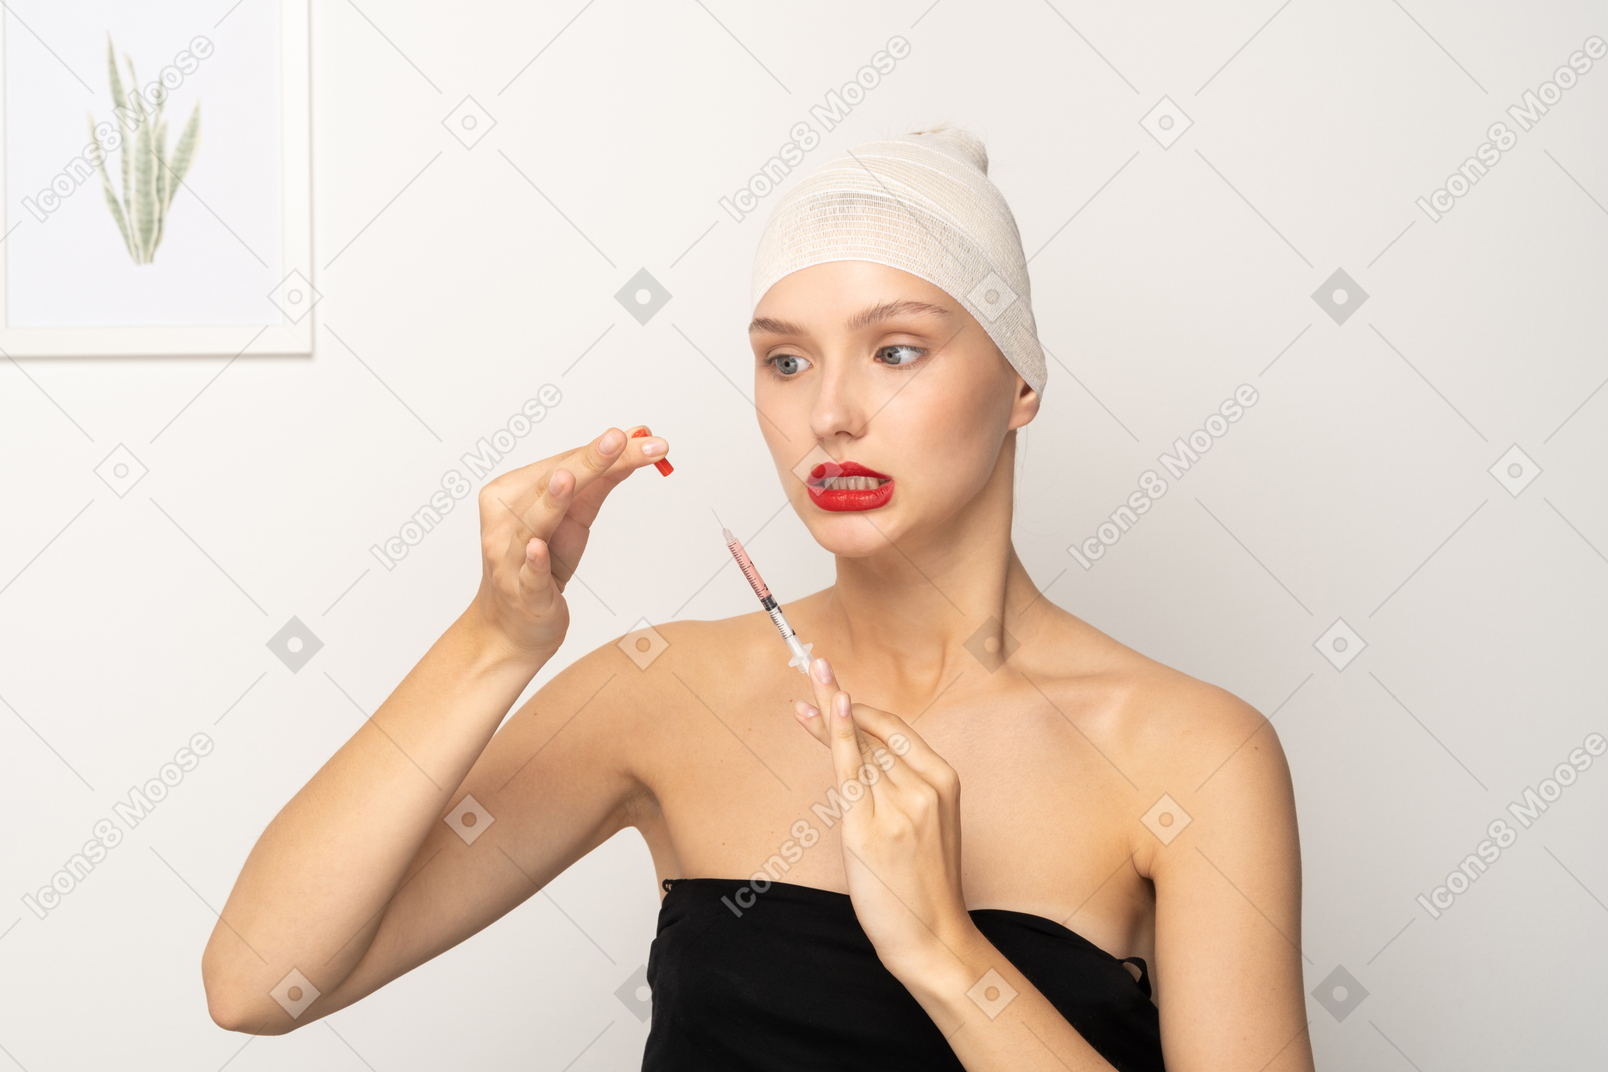 Young woman looking anxious while holding a syringe